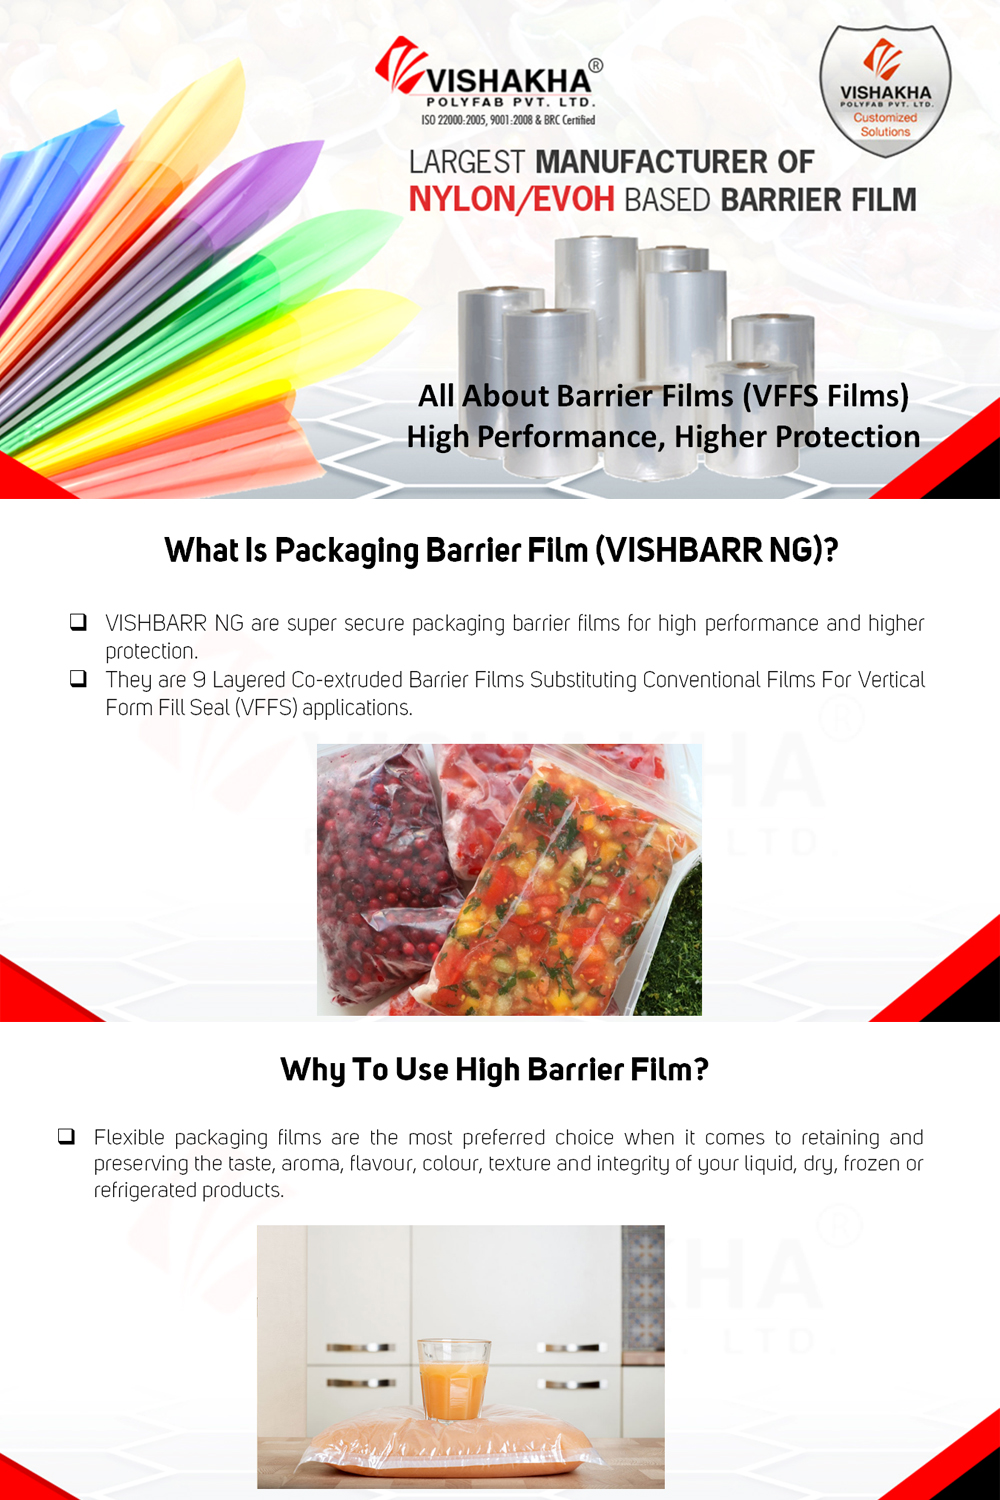 All About Barrier Films (VFFS Films) - High Performance, Higher Protection